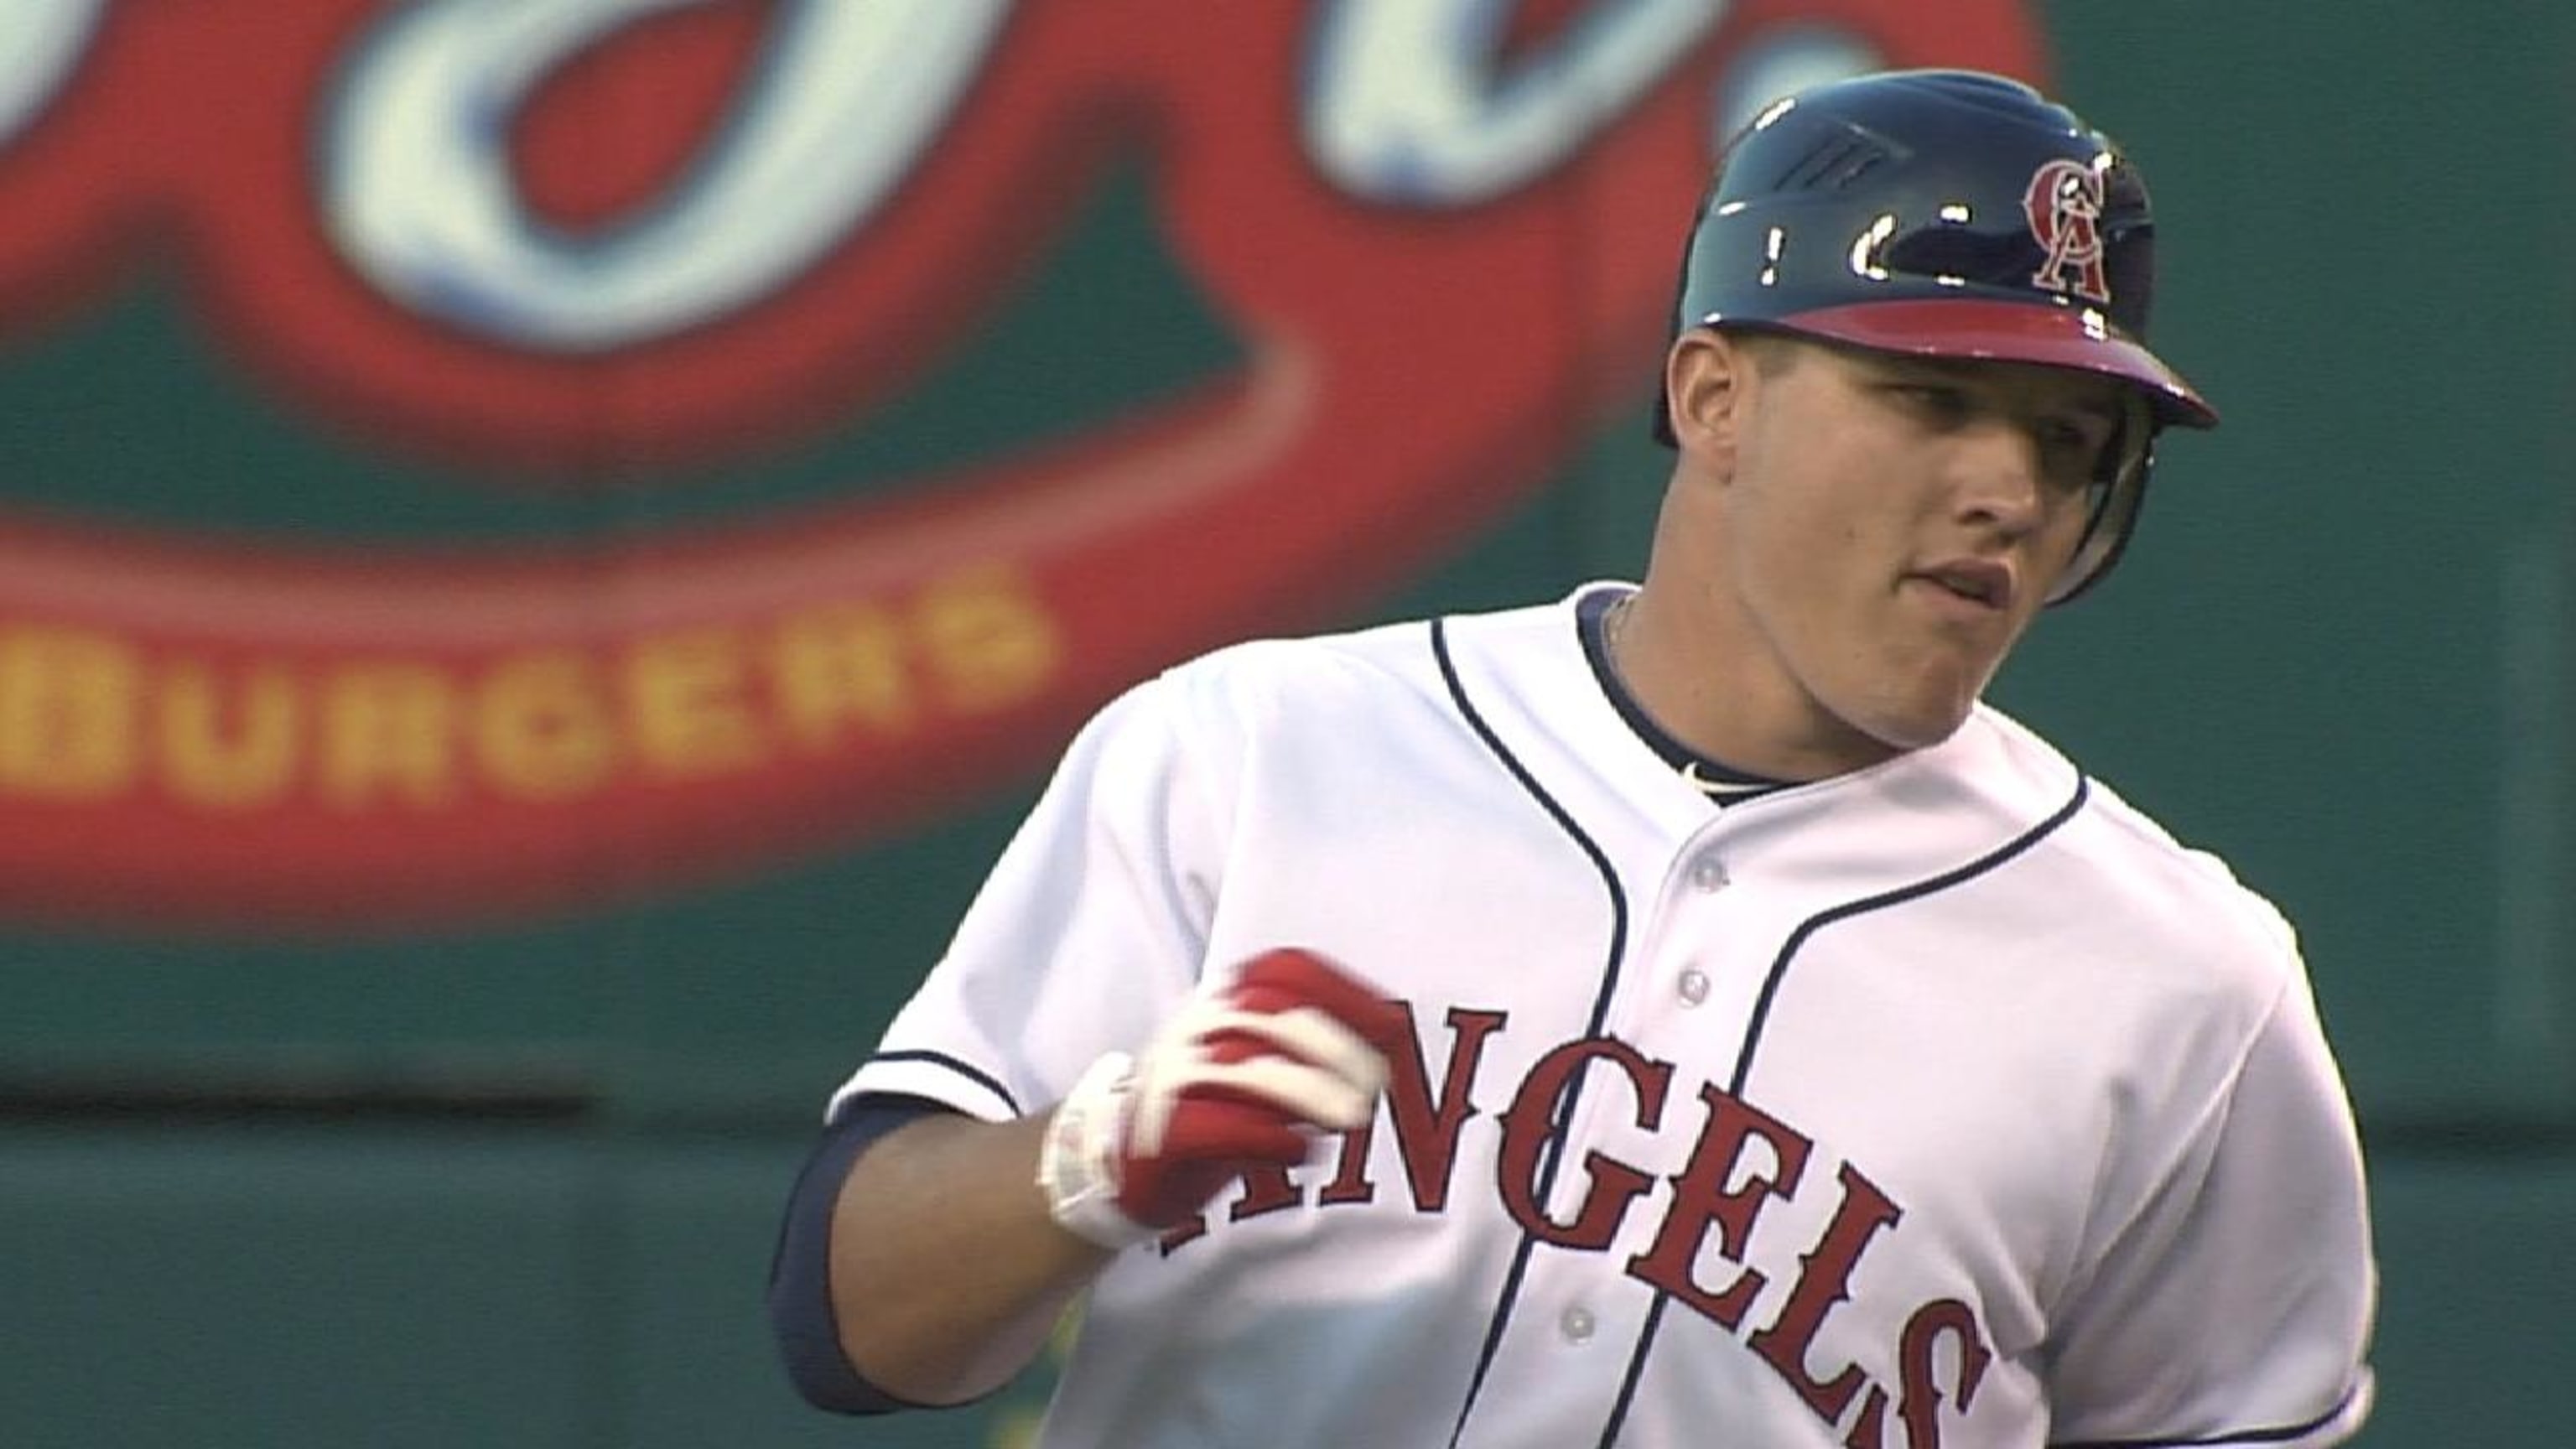 MLB - Mike Trout is putting up Mike Trout numbers.